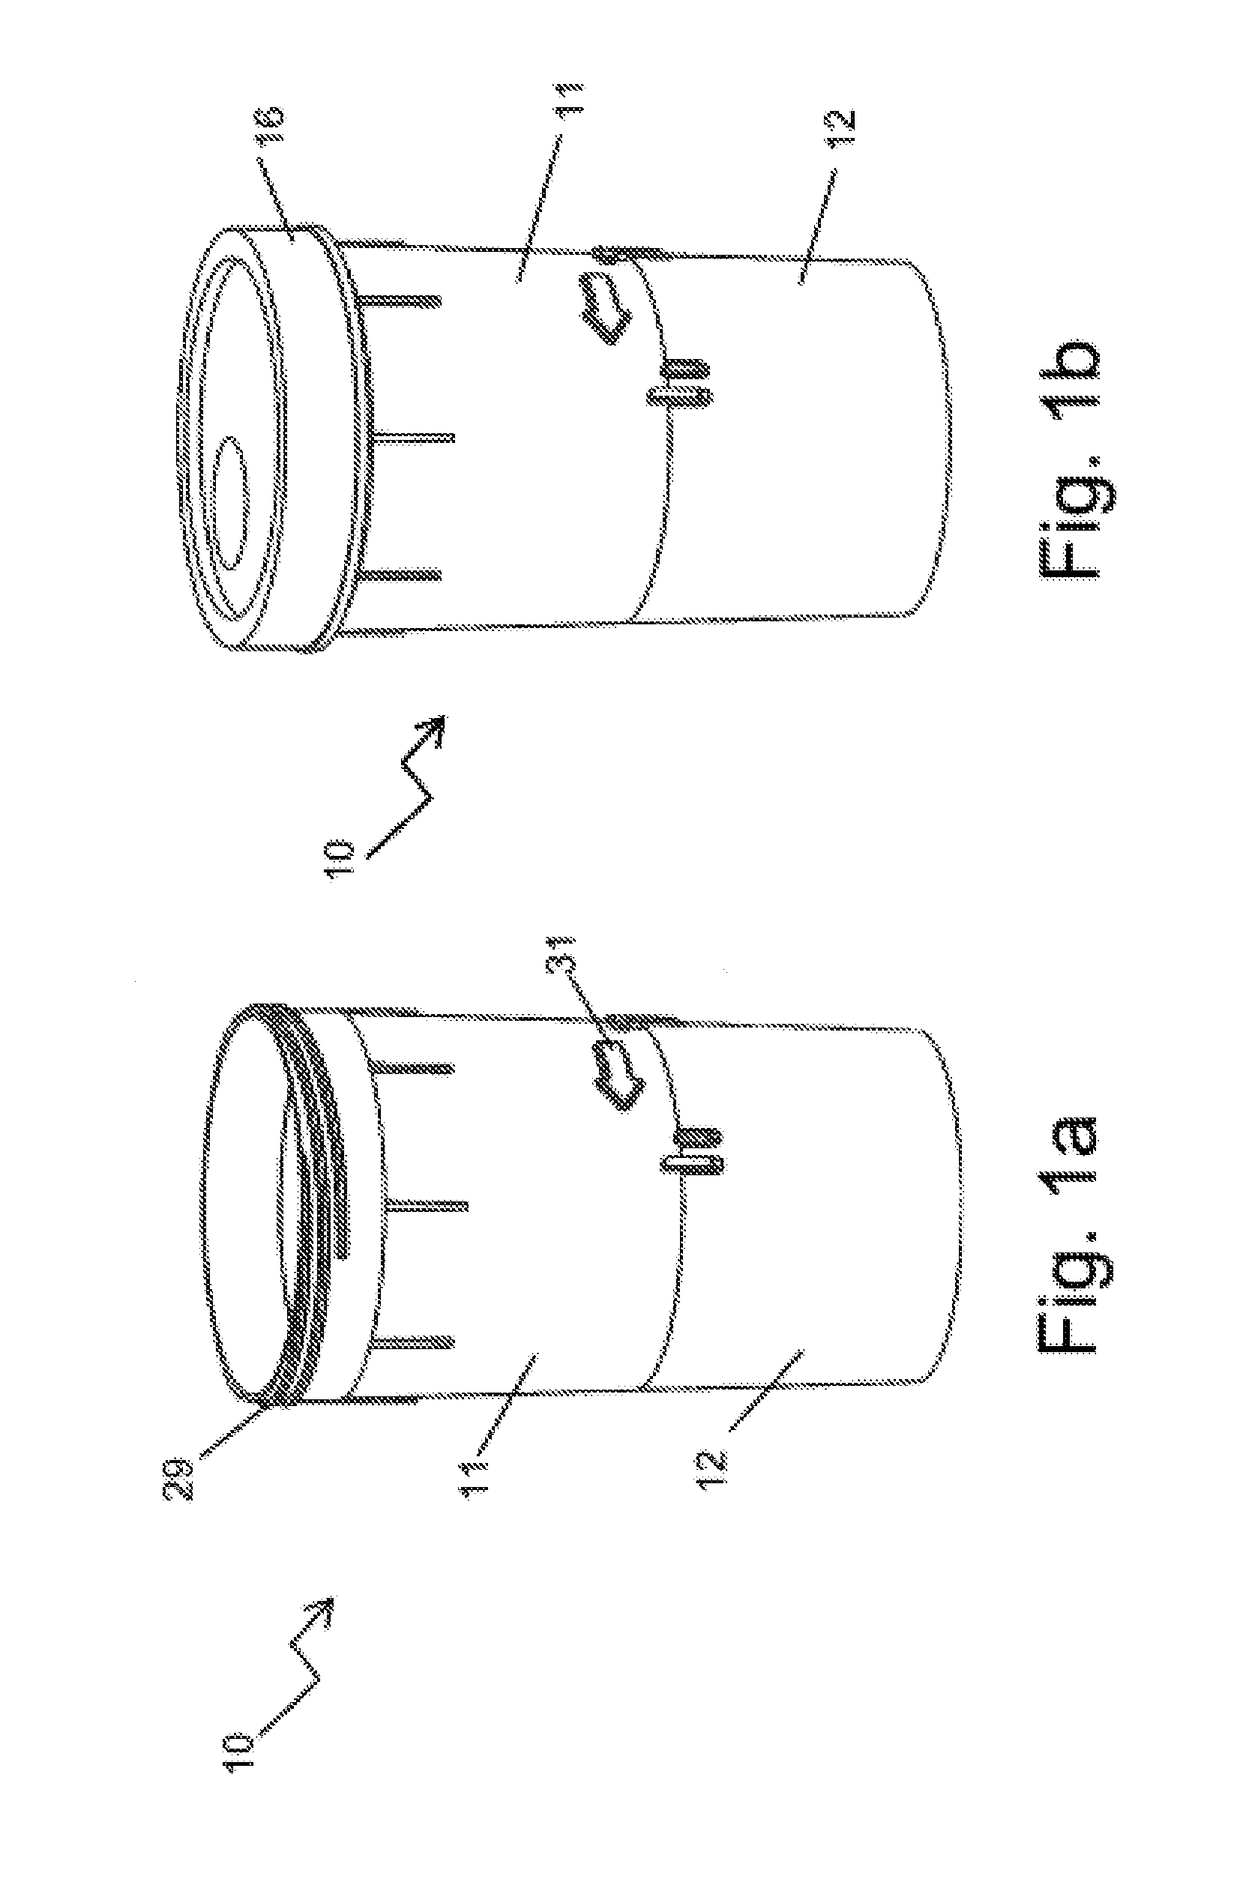 Body liquids collection and diagnostic device